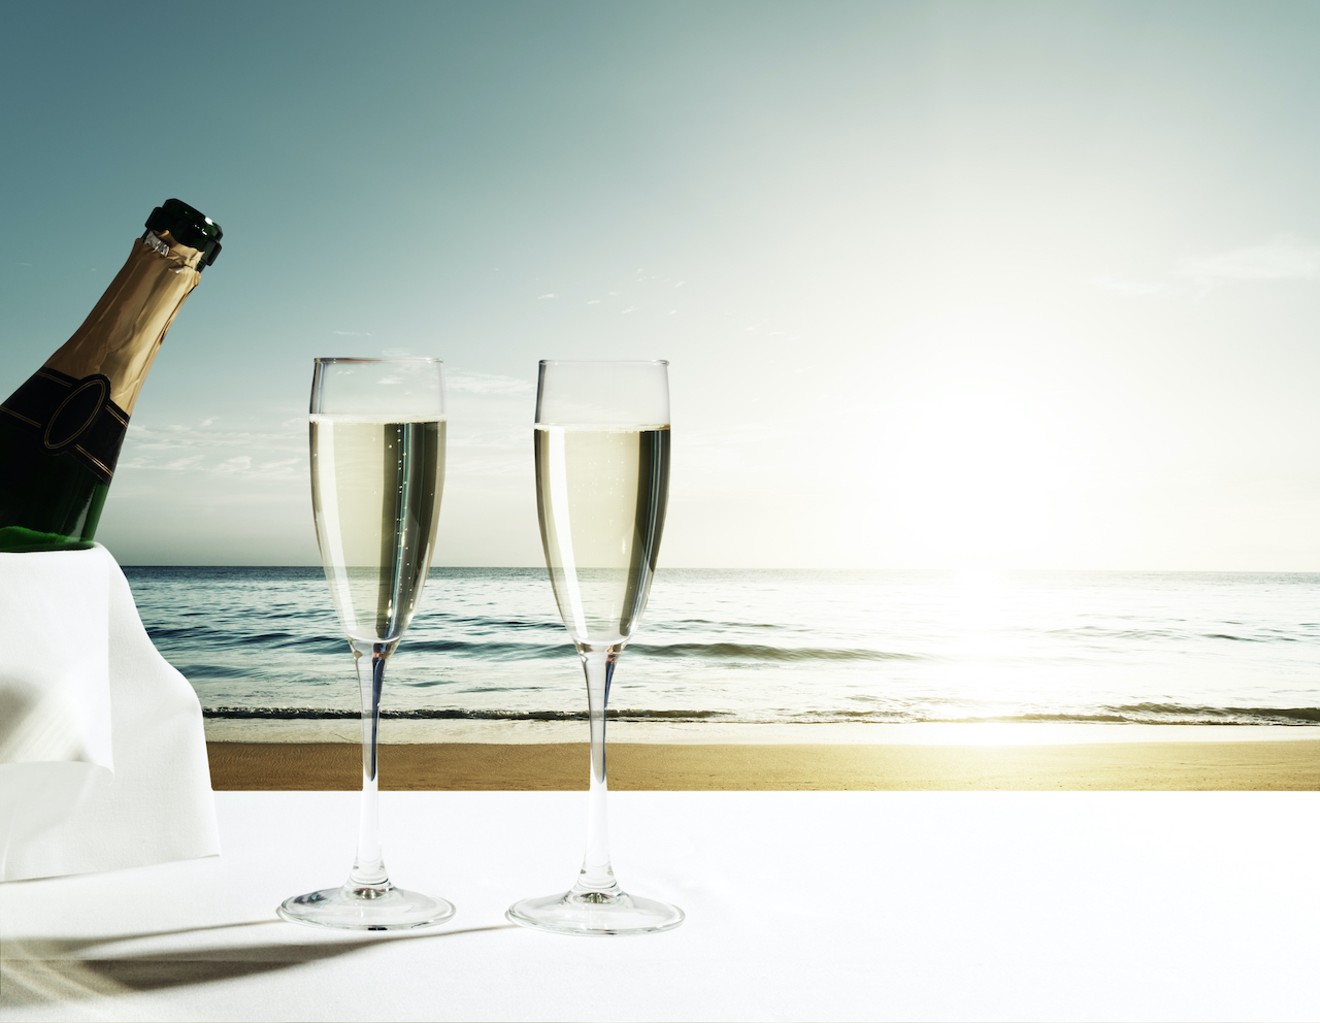 Enjoy a New Year's Eve champagne toast at Oceanic at Pompano Pier.